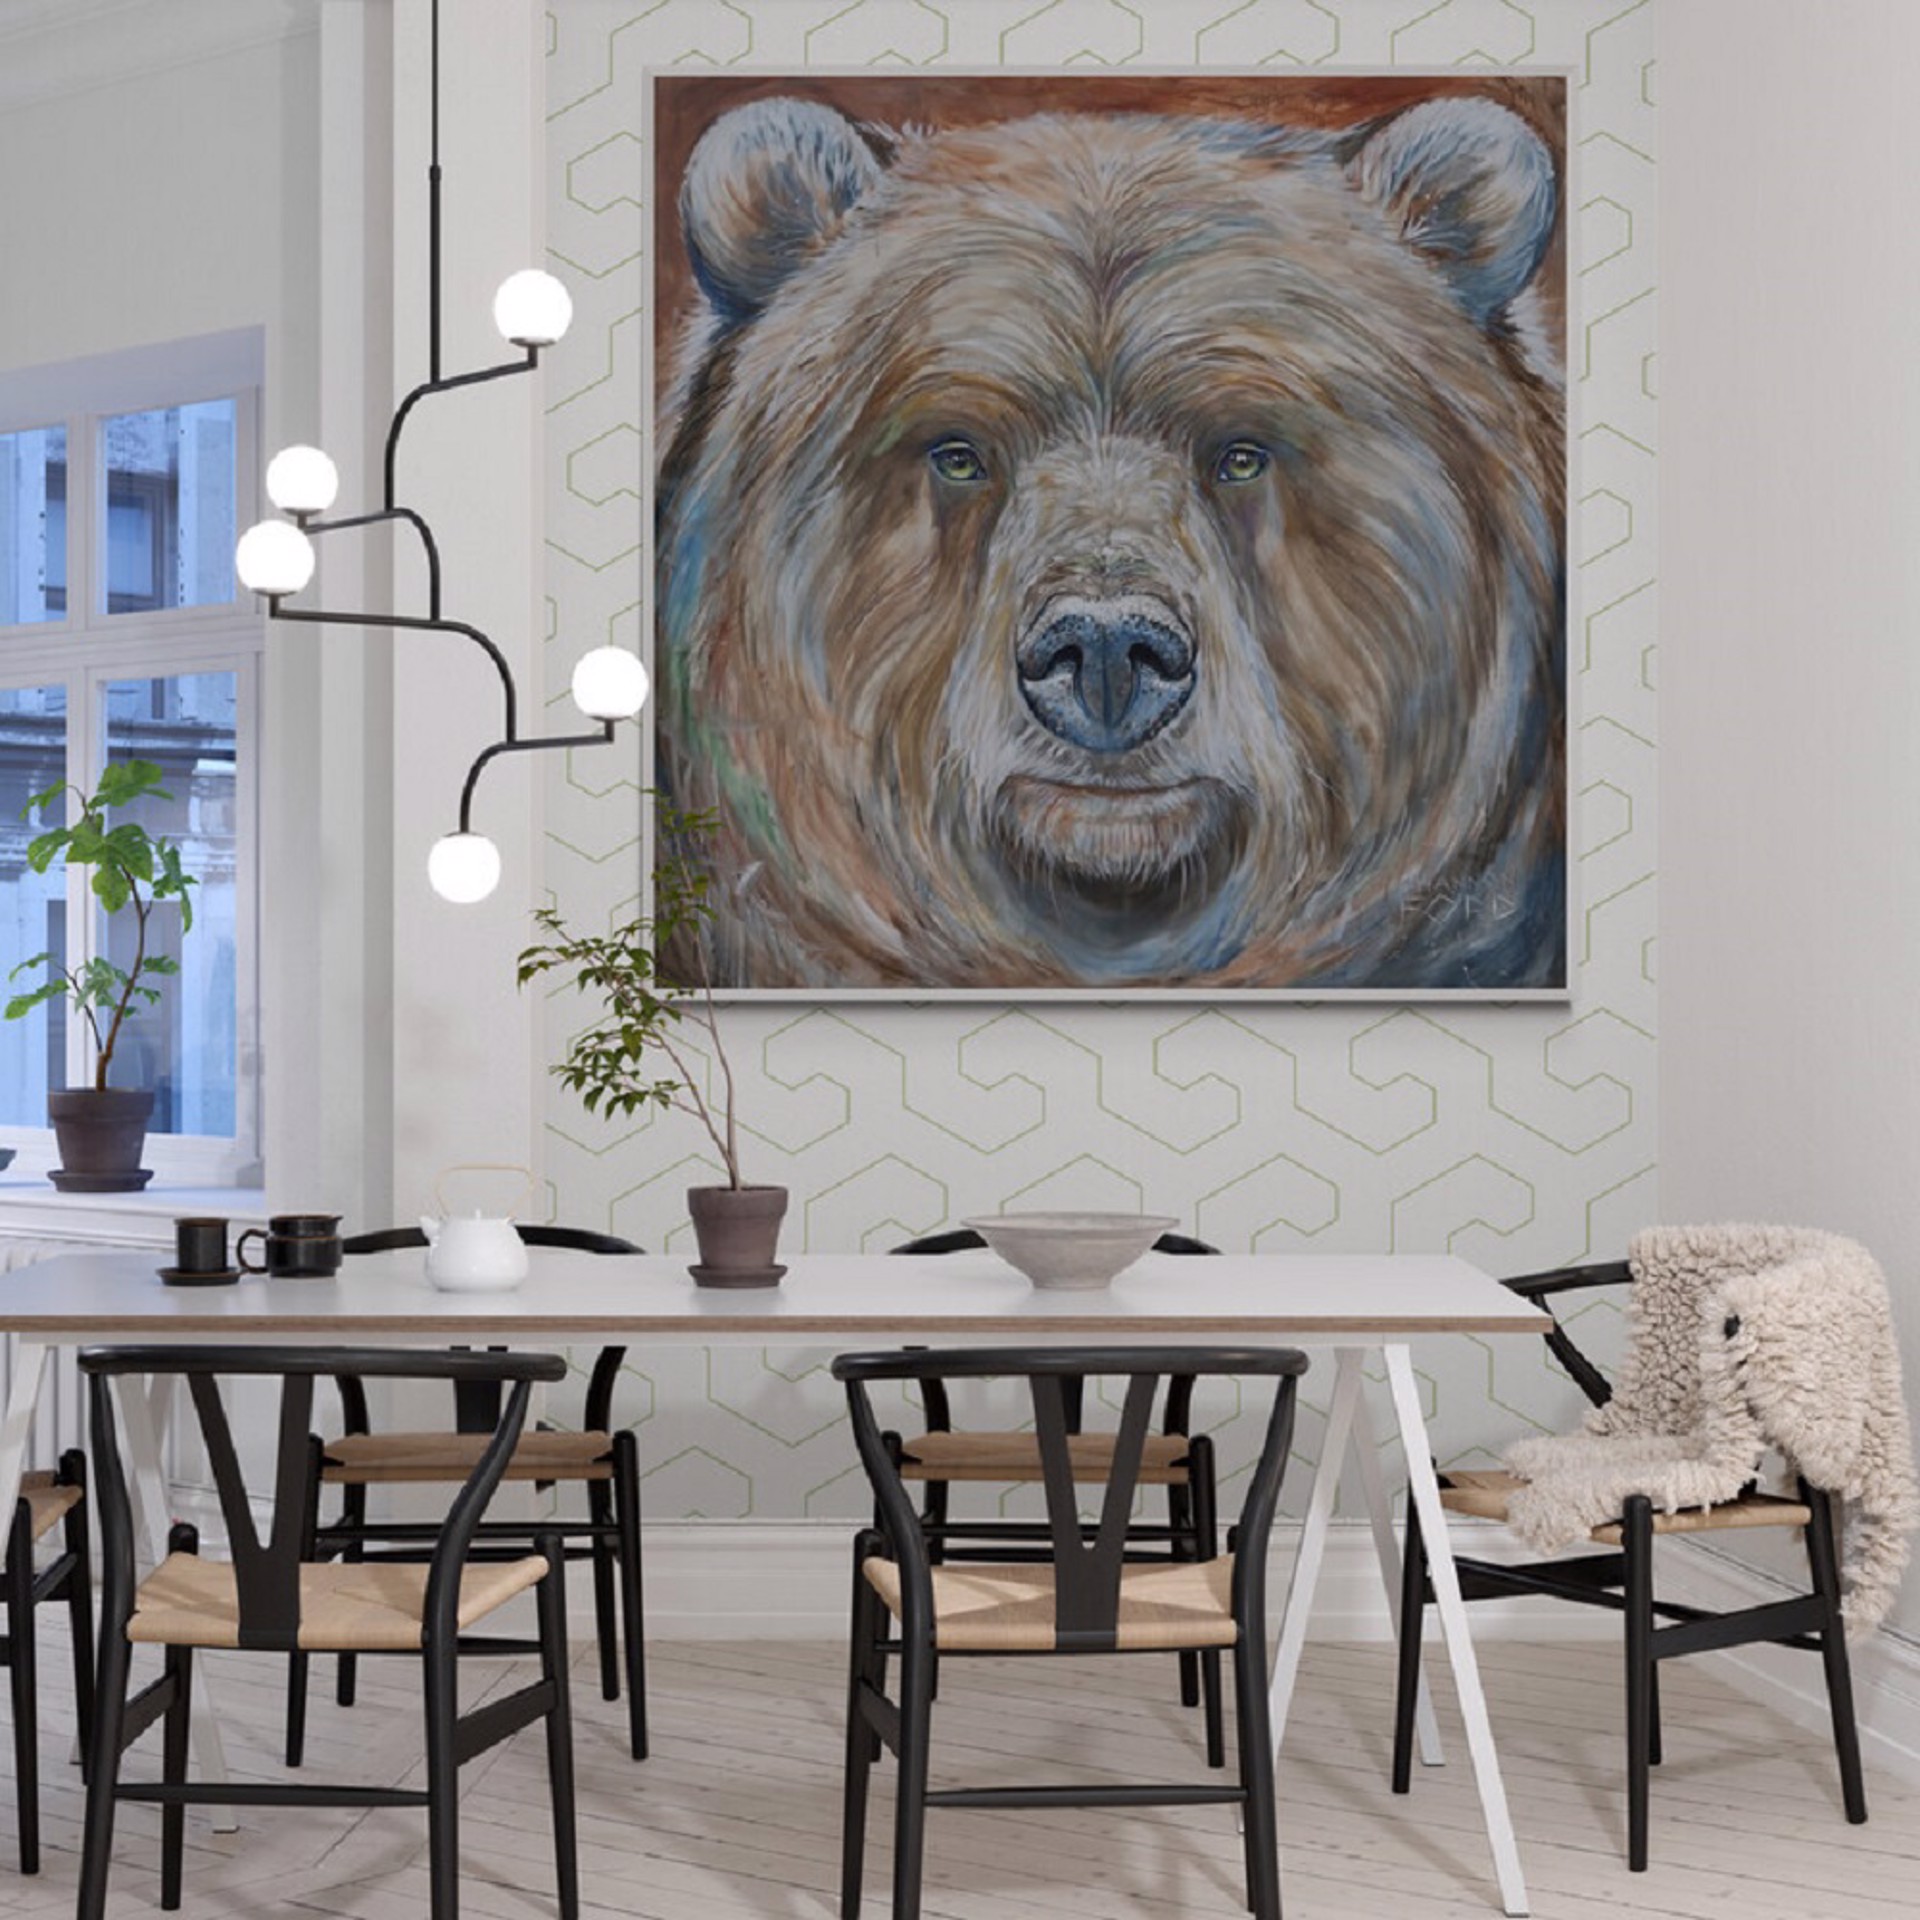 Grizzly Fondness by Shannon Ford